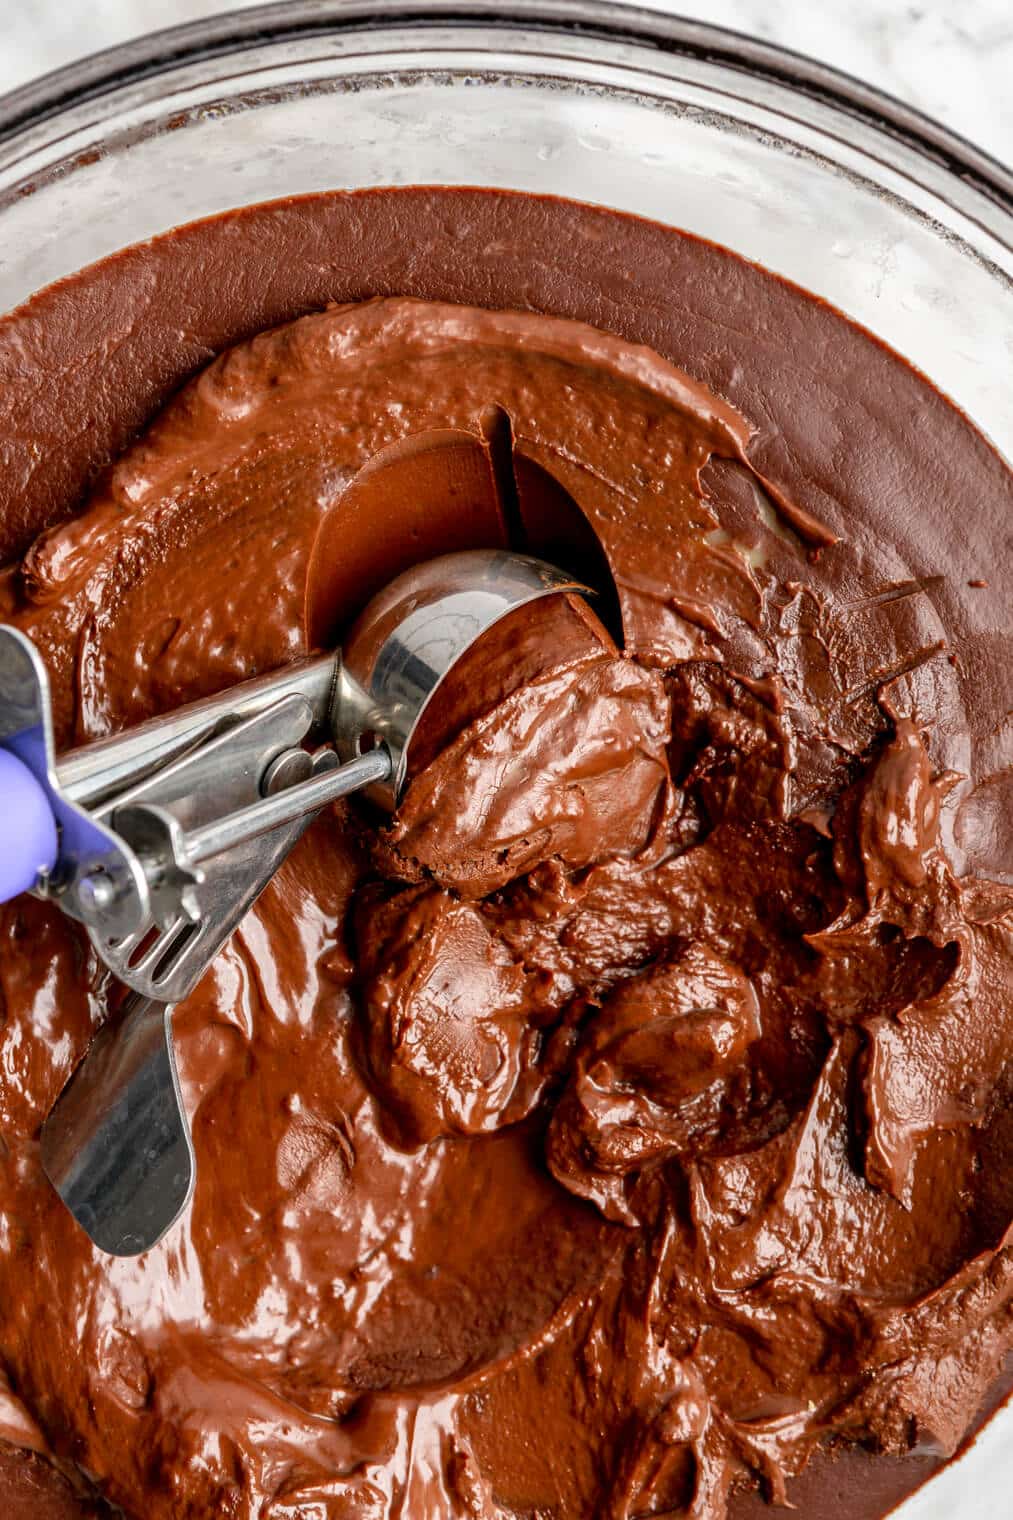 Cookie scoop scooping chocolate ganache out of a bowl.